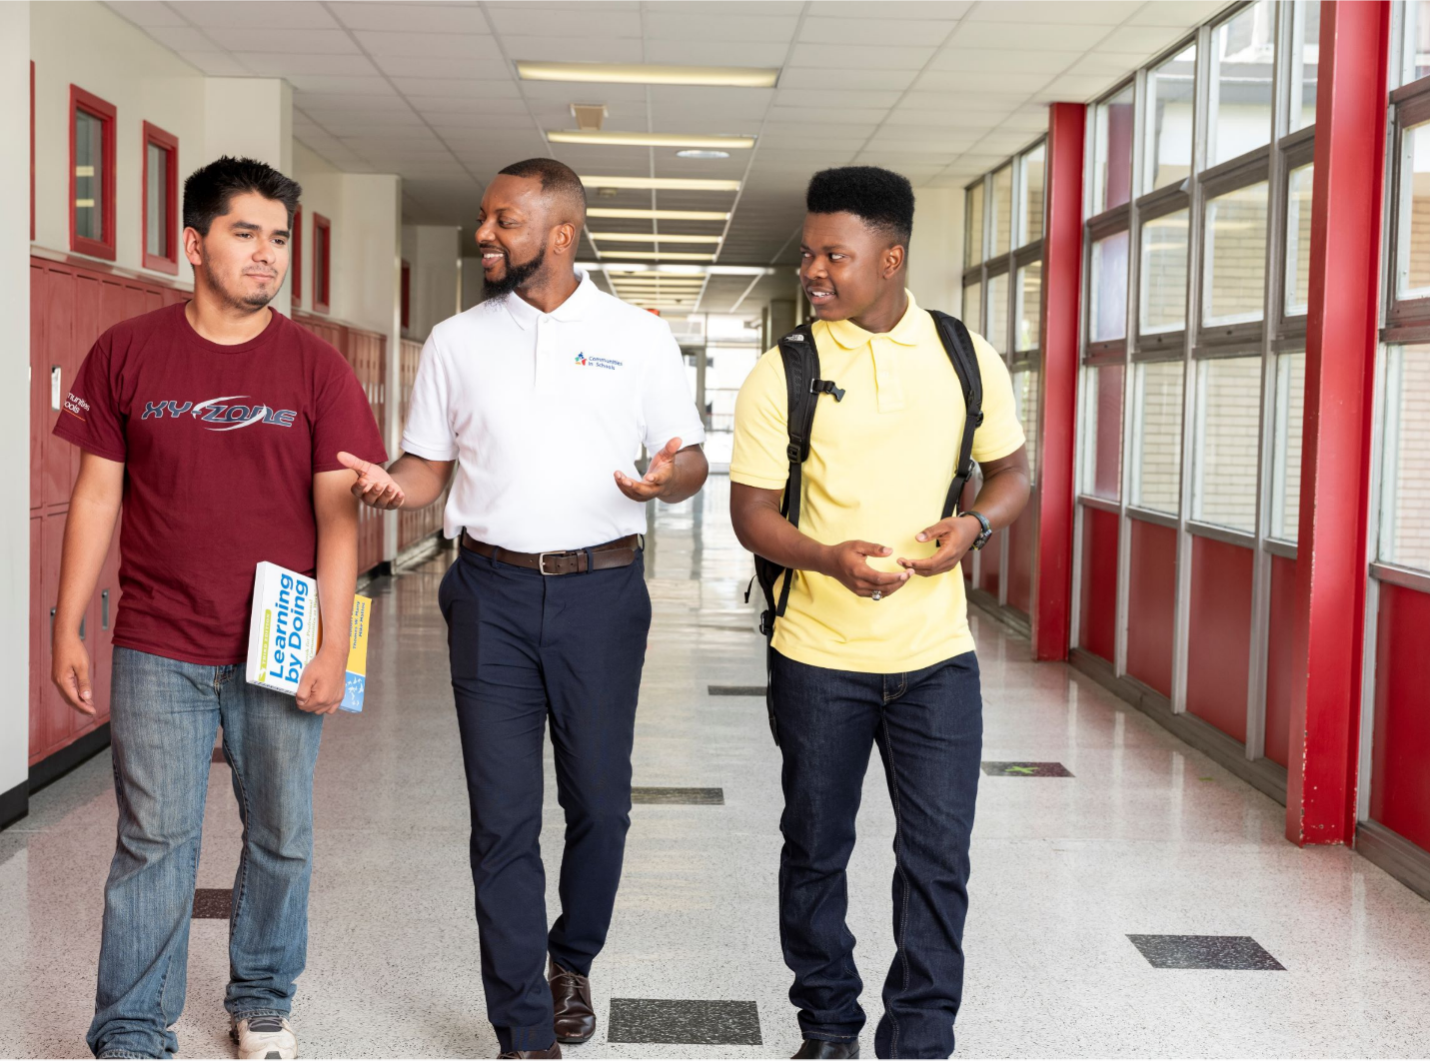 Two students and an adult walk the halls of a high school.